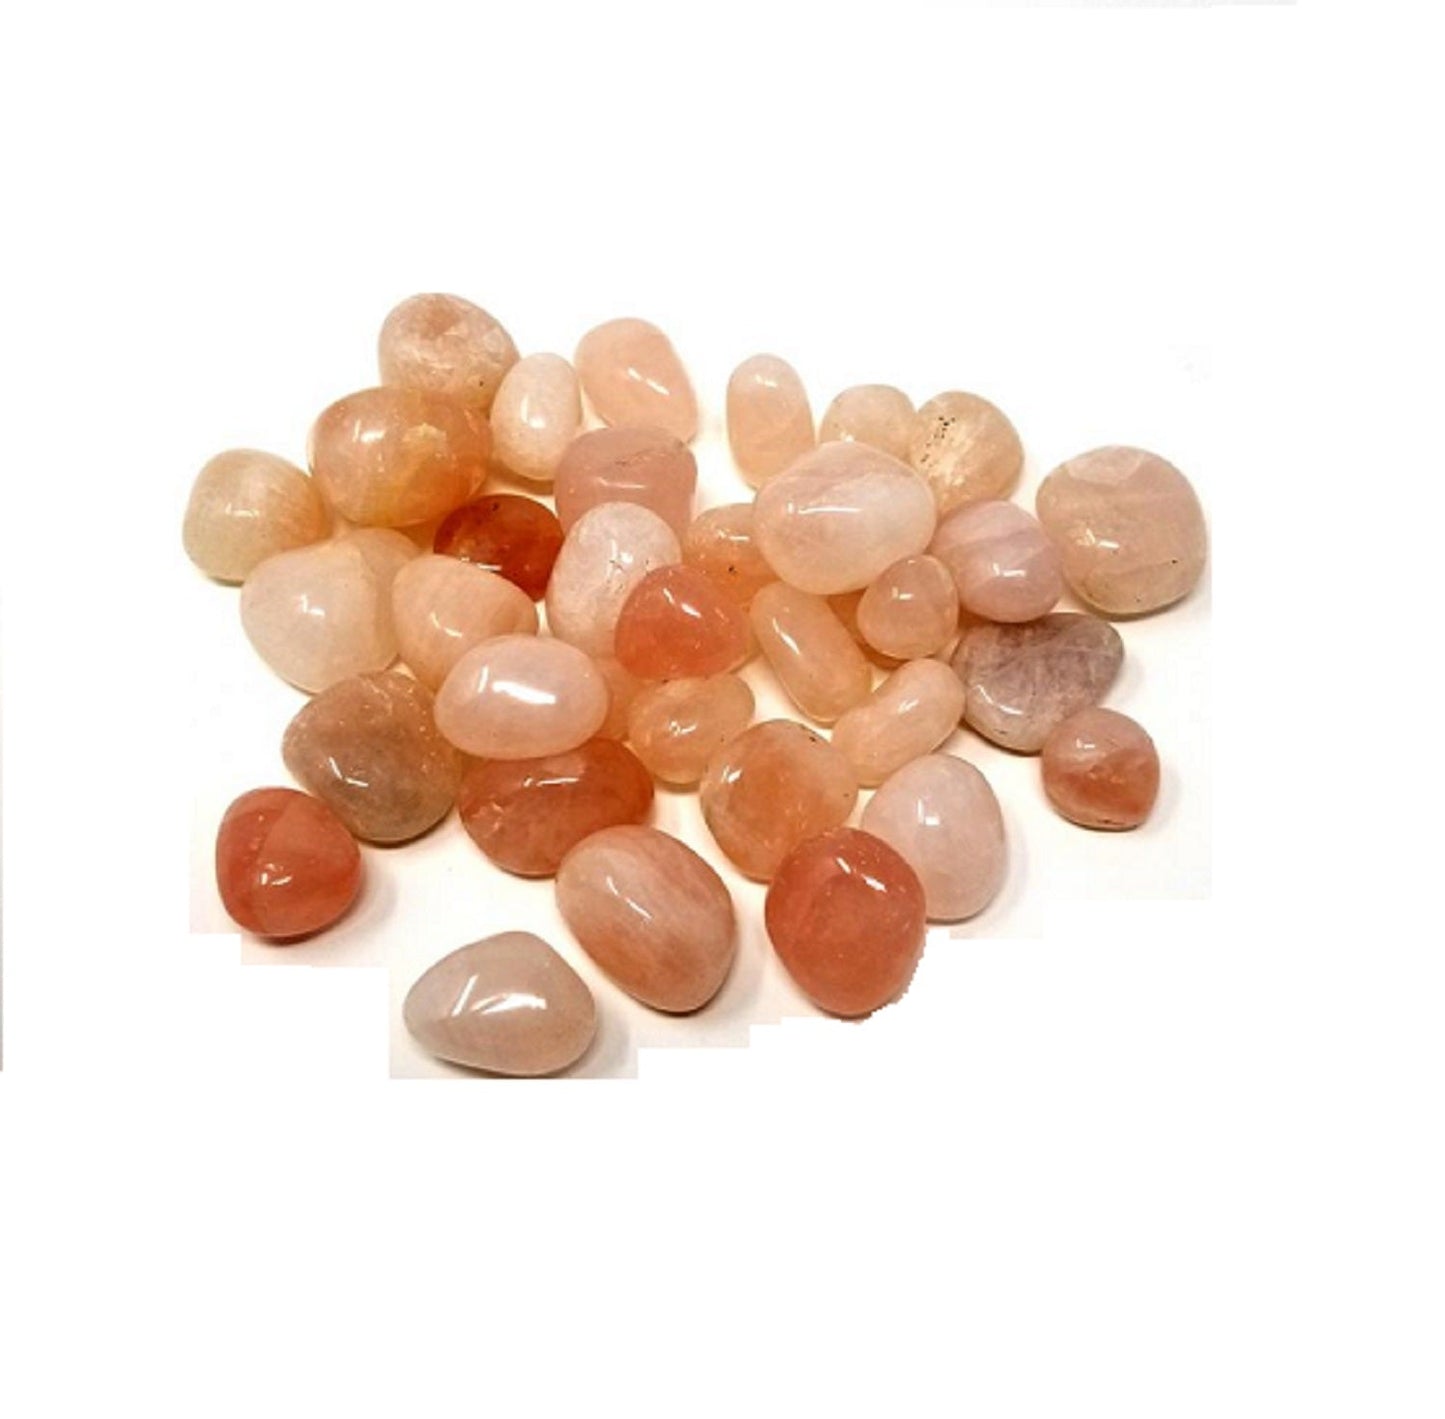 This Rose Quartz Tumbled Genuine Polished Gemstone from Earth to Daisy is perfect for the modern plant mom in her indoor jungle! #plantsmakepeoplehappy